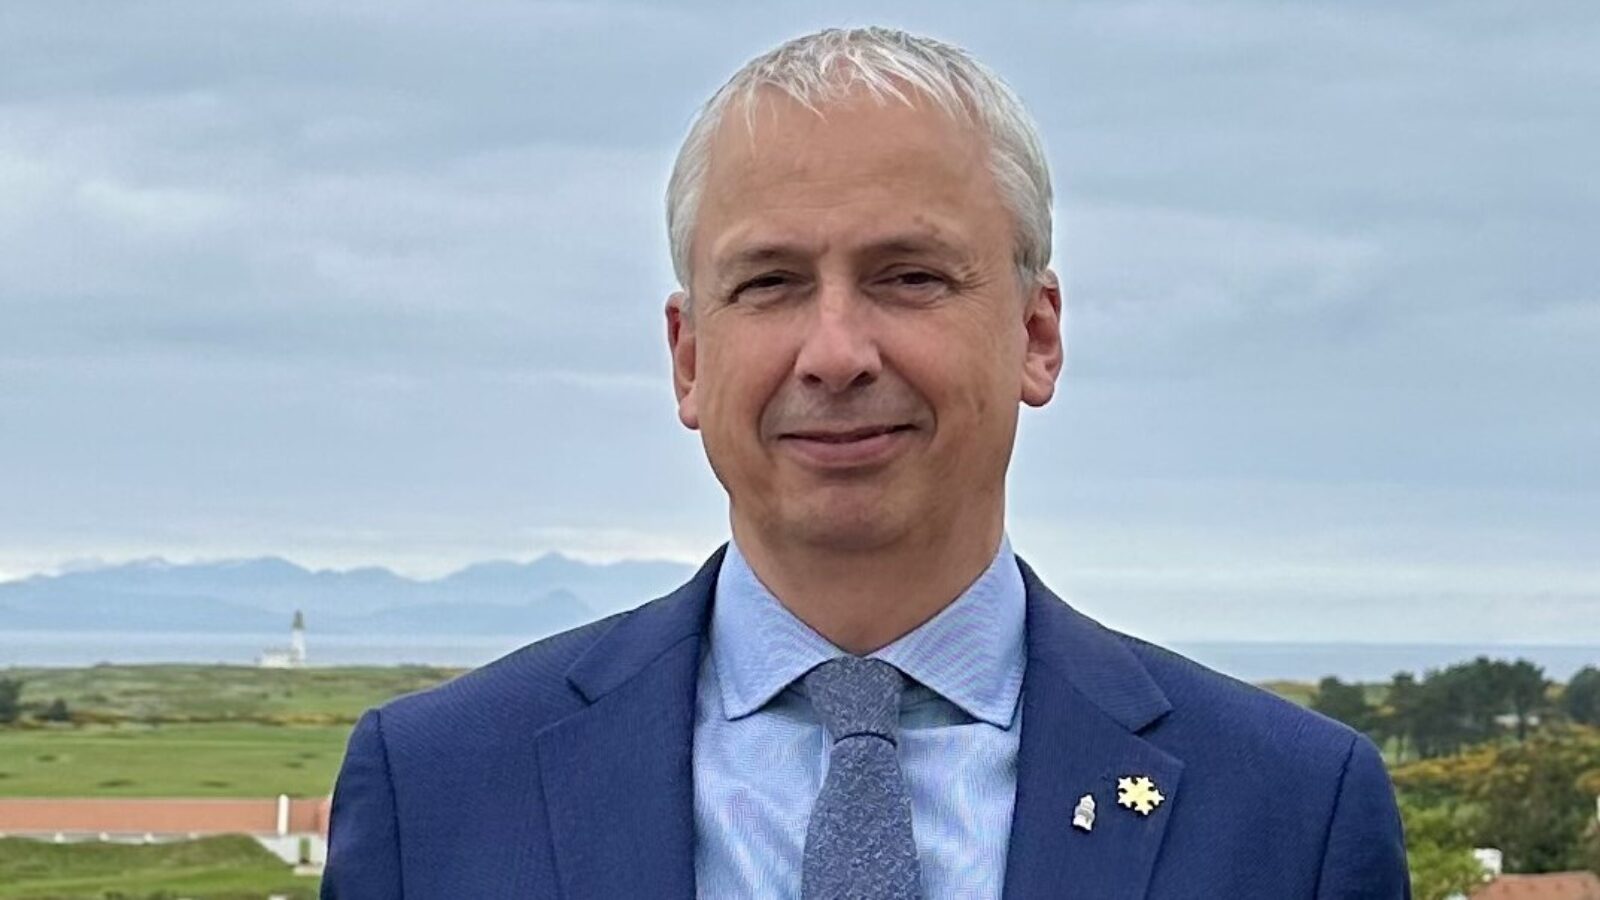 Trump Turnberry announces appointment of new General Manager